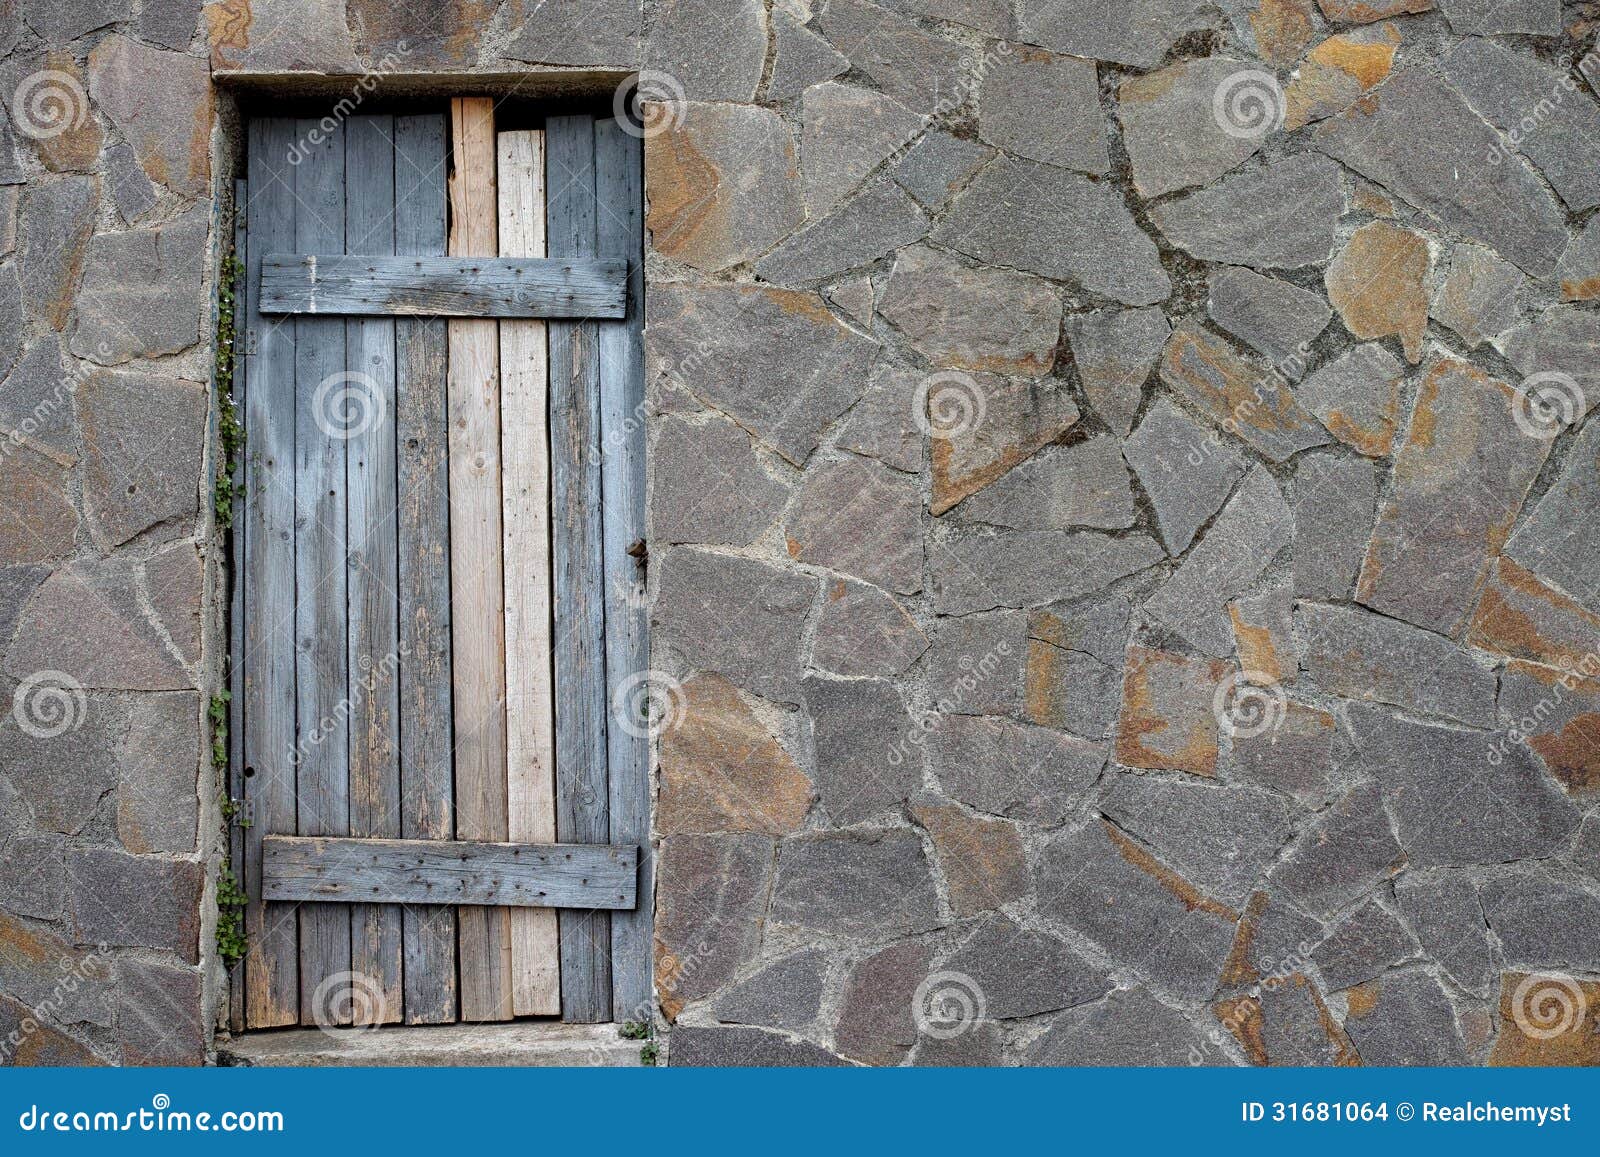 Door and stone wall stock photo. Image of building, ancient - 31681064